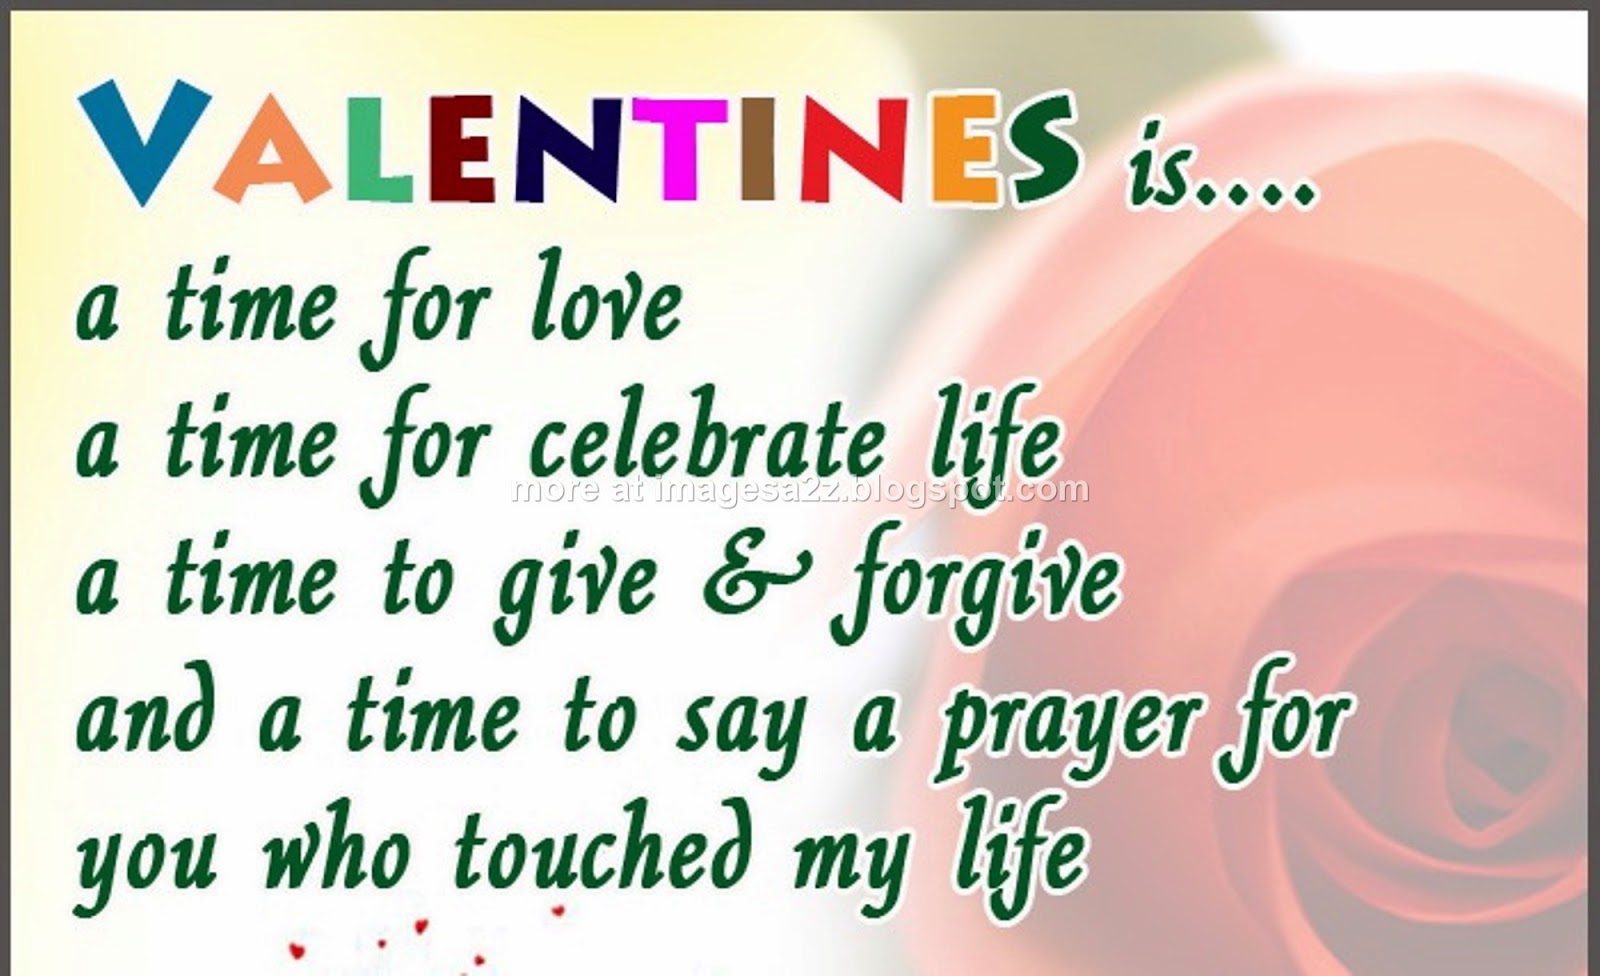 valentine's day 2014 wallpaper | lovers day | feb 14 - happy-birthday-wishes-quotes ...1600 x 976